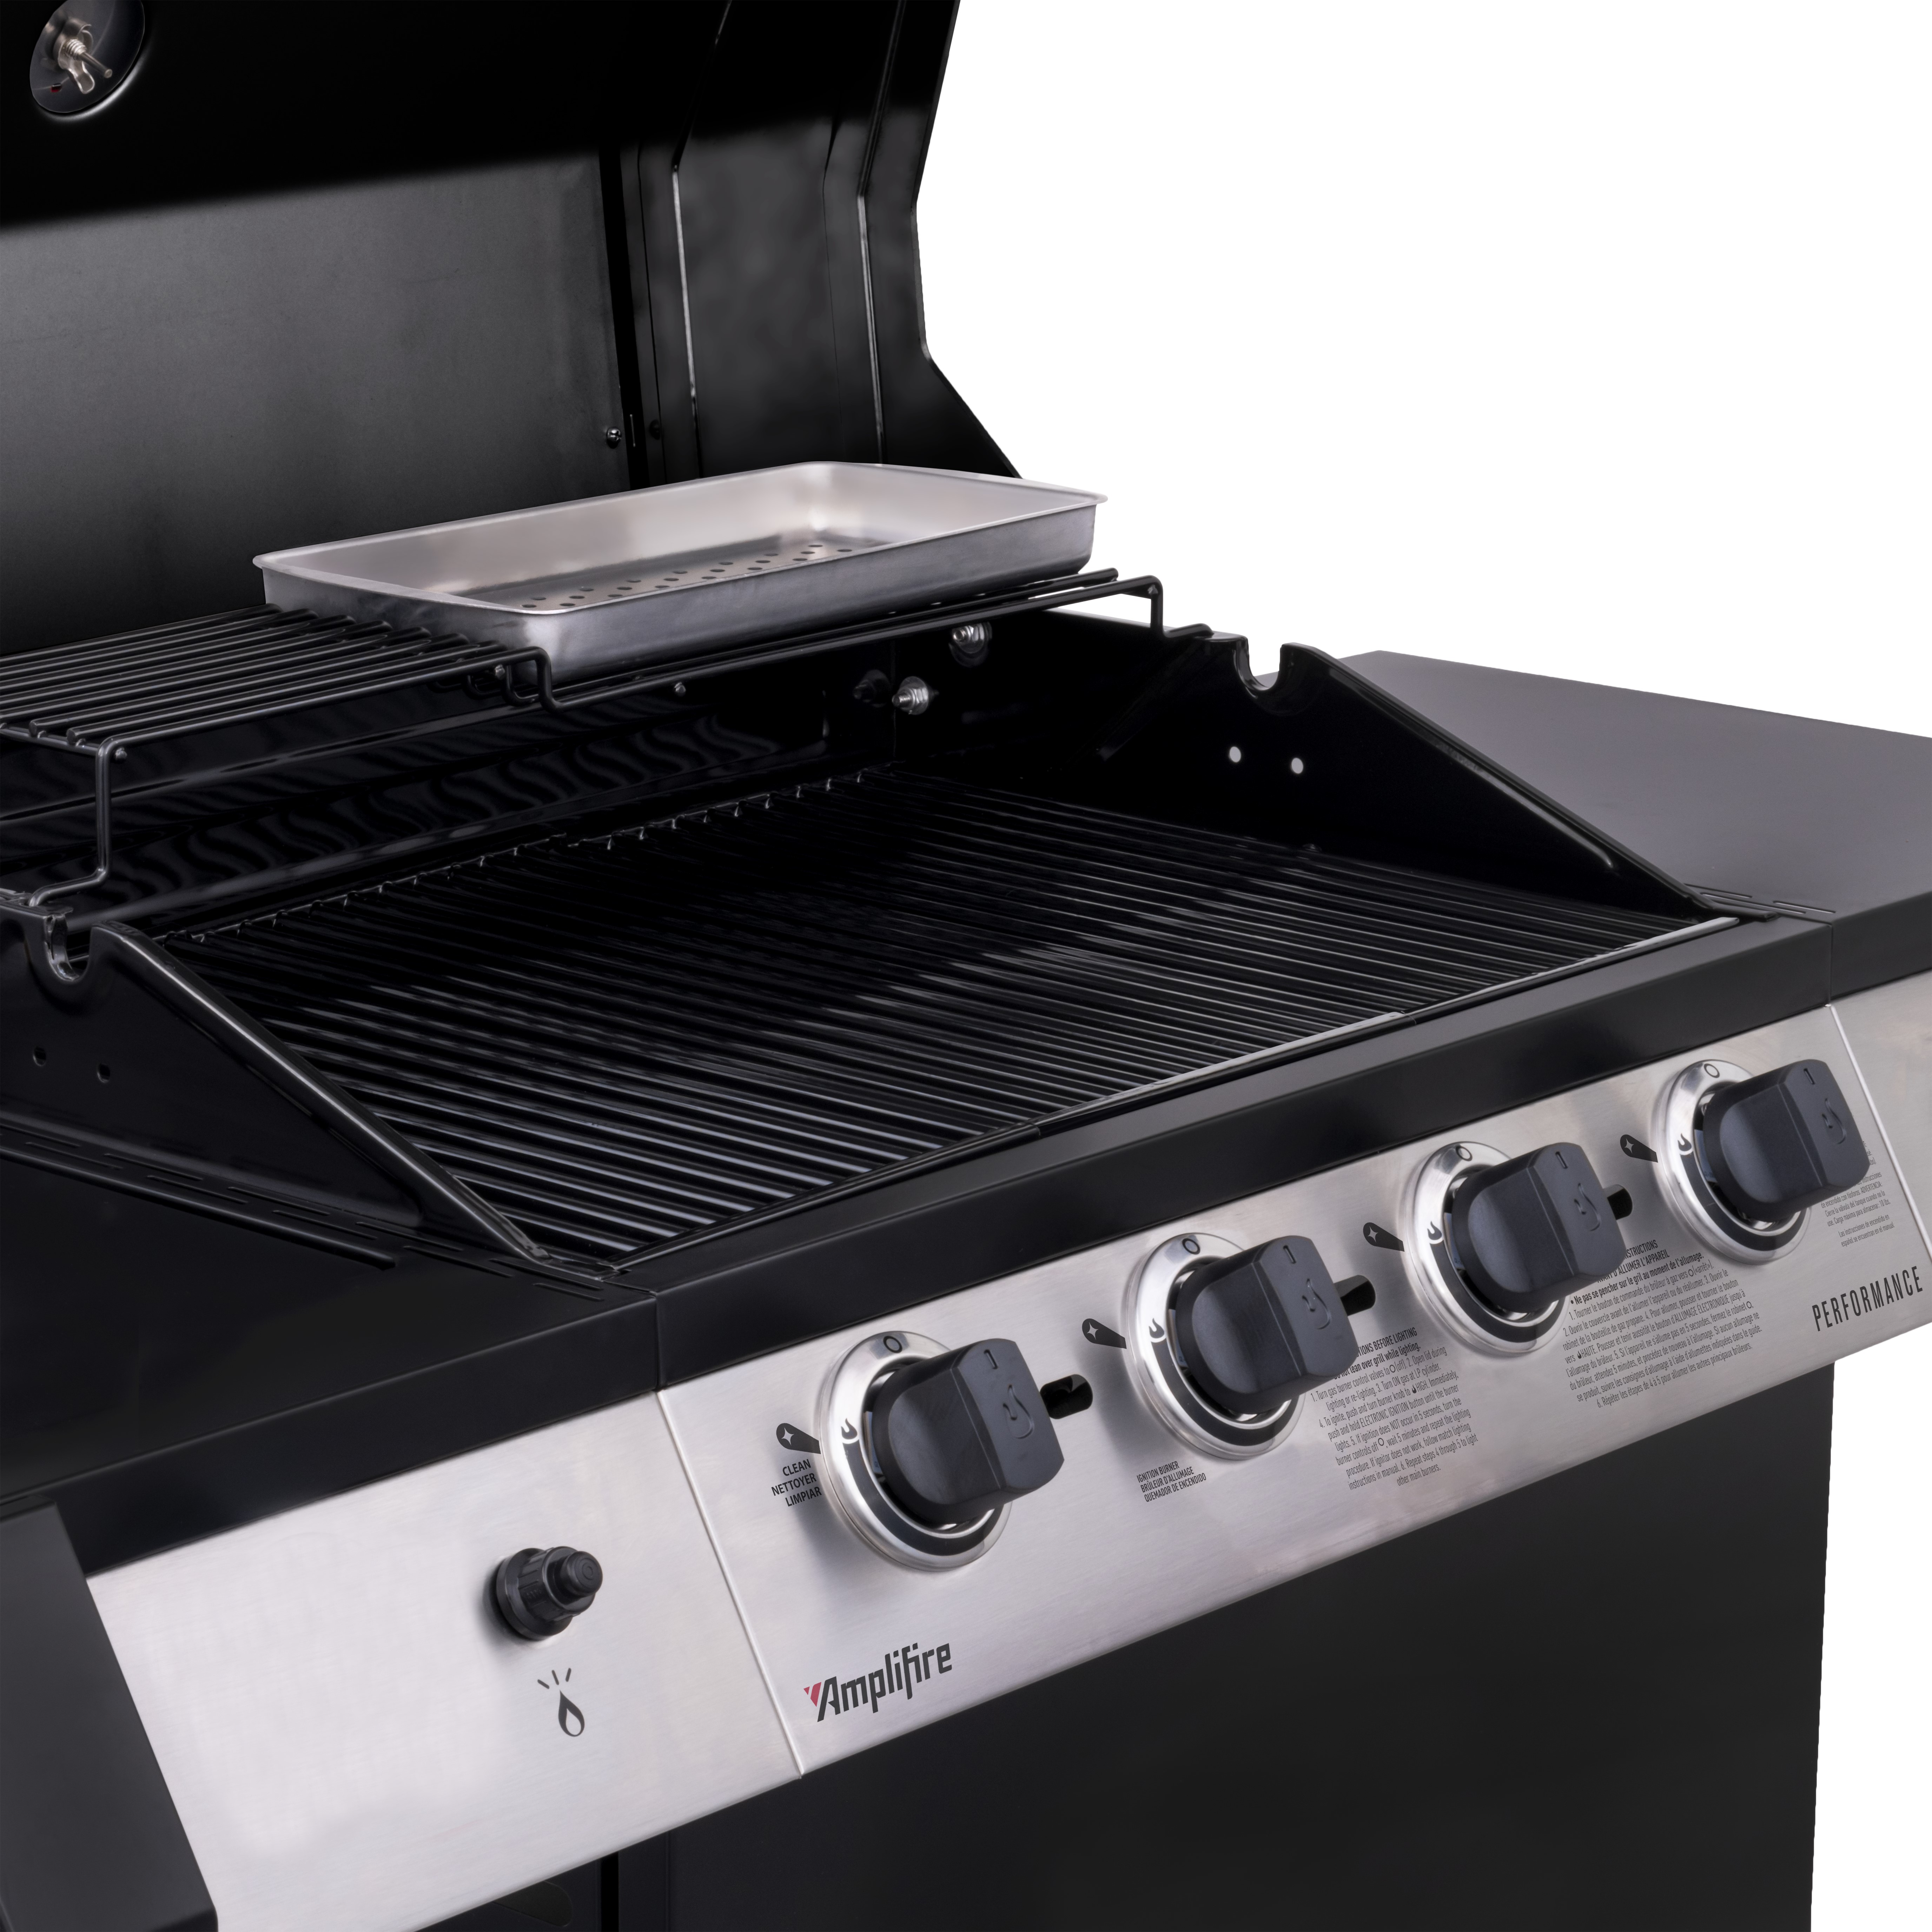 Char-Broil® Performance Series™ Amplifire 4-Burner Gas Grill - image 5 of 5